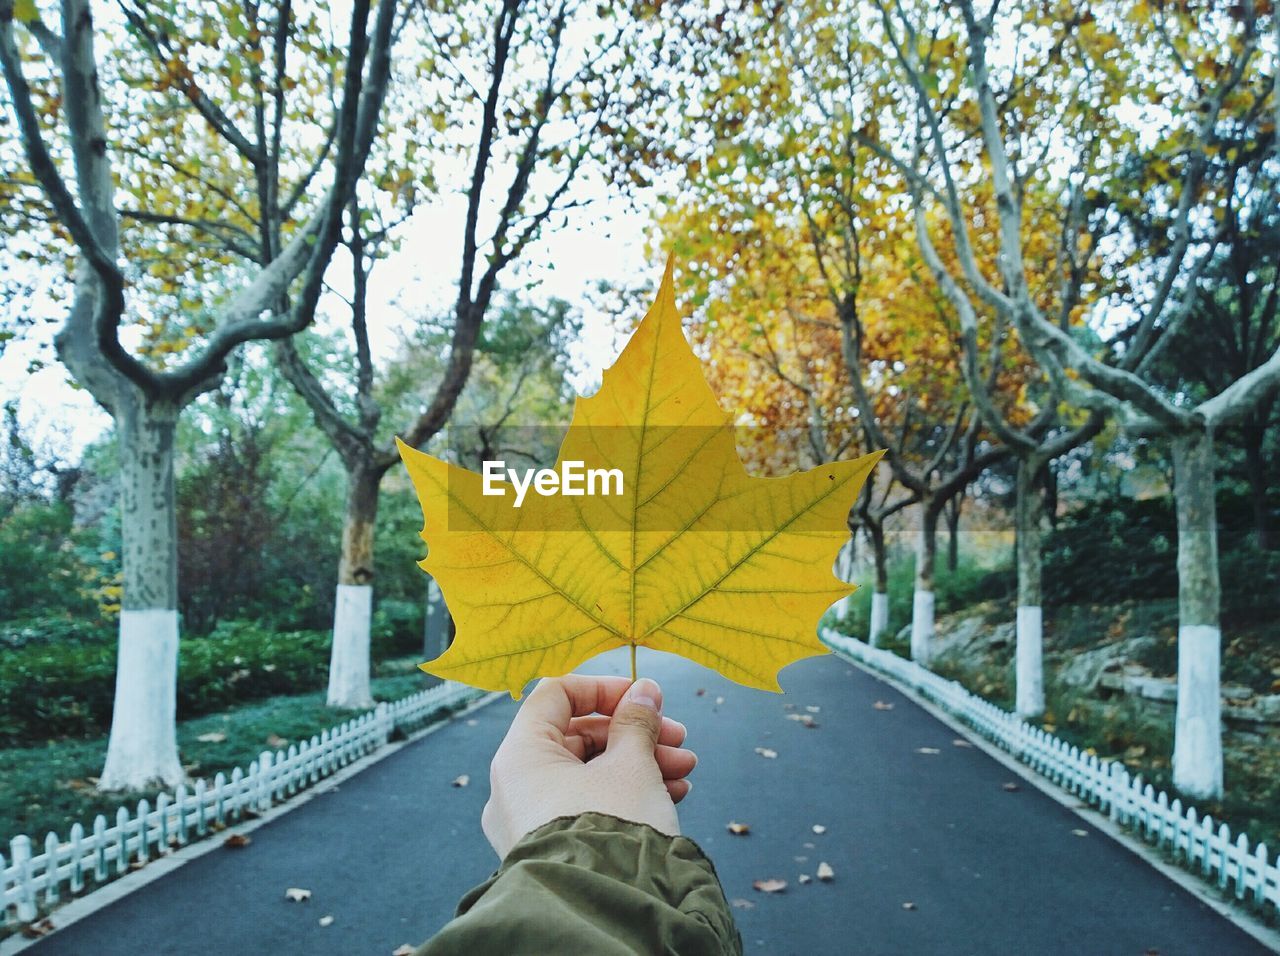 Cropped hand of person holding maple leaf amidst trees on road